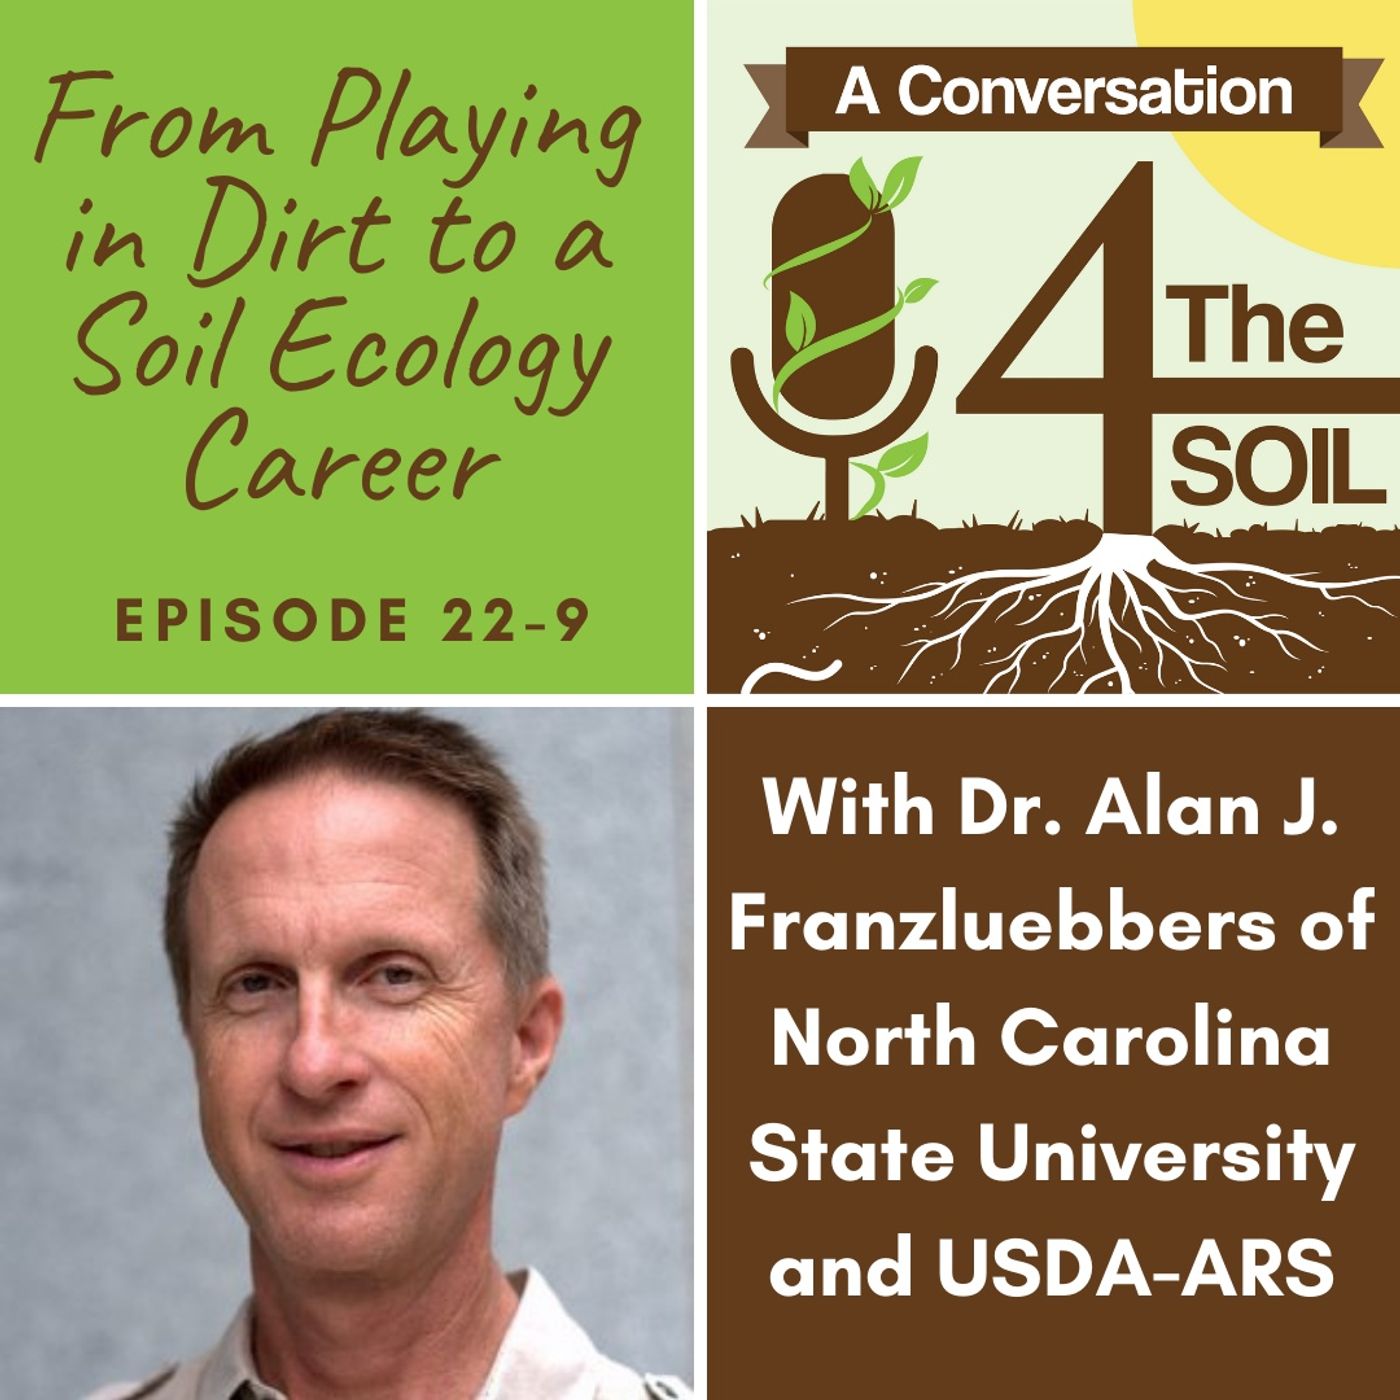 Episode 22 - 9: From Playing in Dirt to a Soil Ecology Career with Dr. Alan J. Franzluebbers of North Carolina State University and USDA-ARS